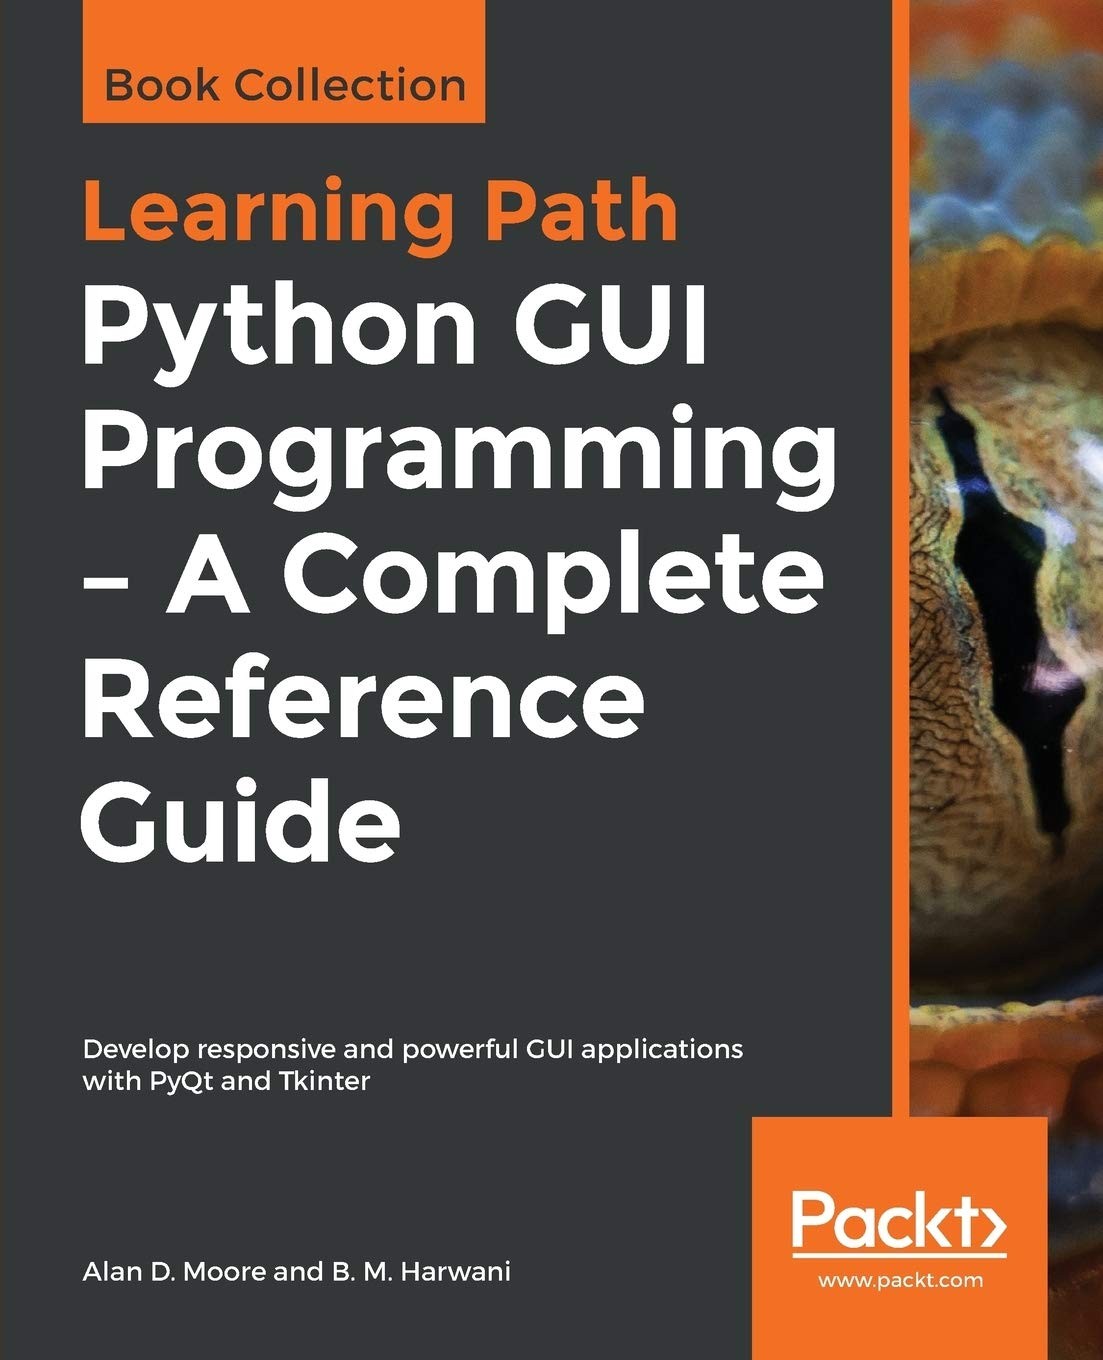 Python GUI Programming - a Complete Reference Guide: Develop Responsive and Powerful GUI Applications With Pyqt and Tkinter